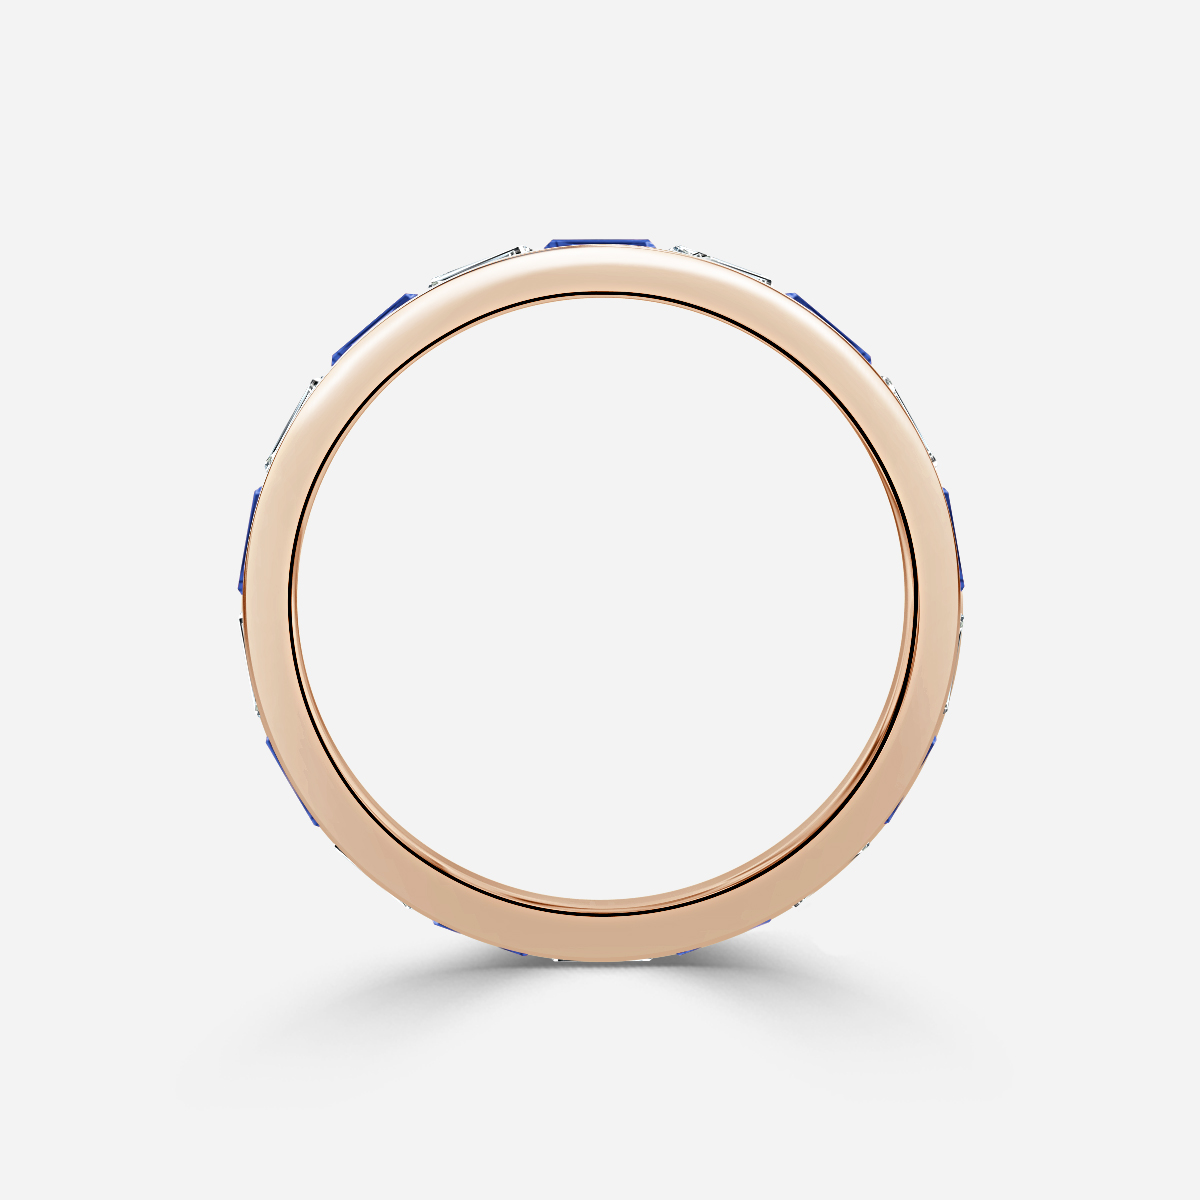 Baguette Cut Sapphire And Diamond Wedding Ring In Rose Gold